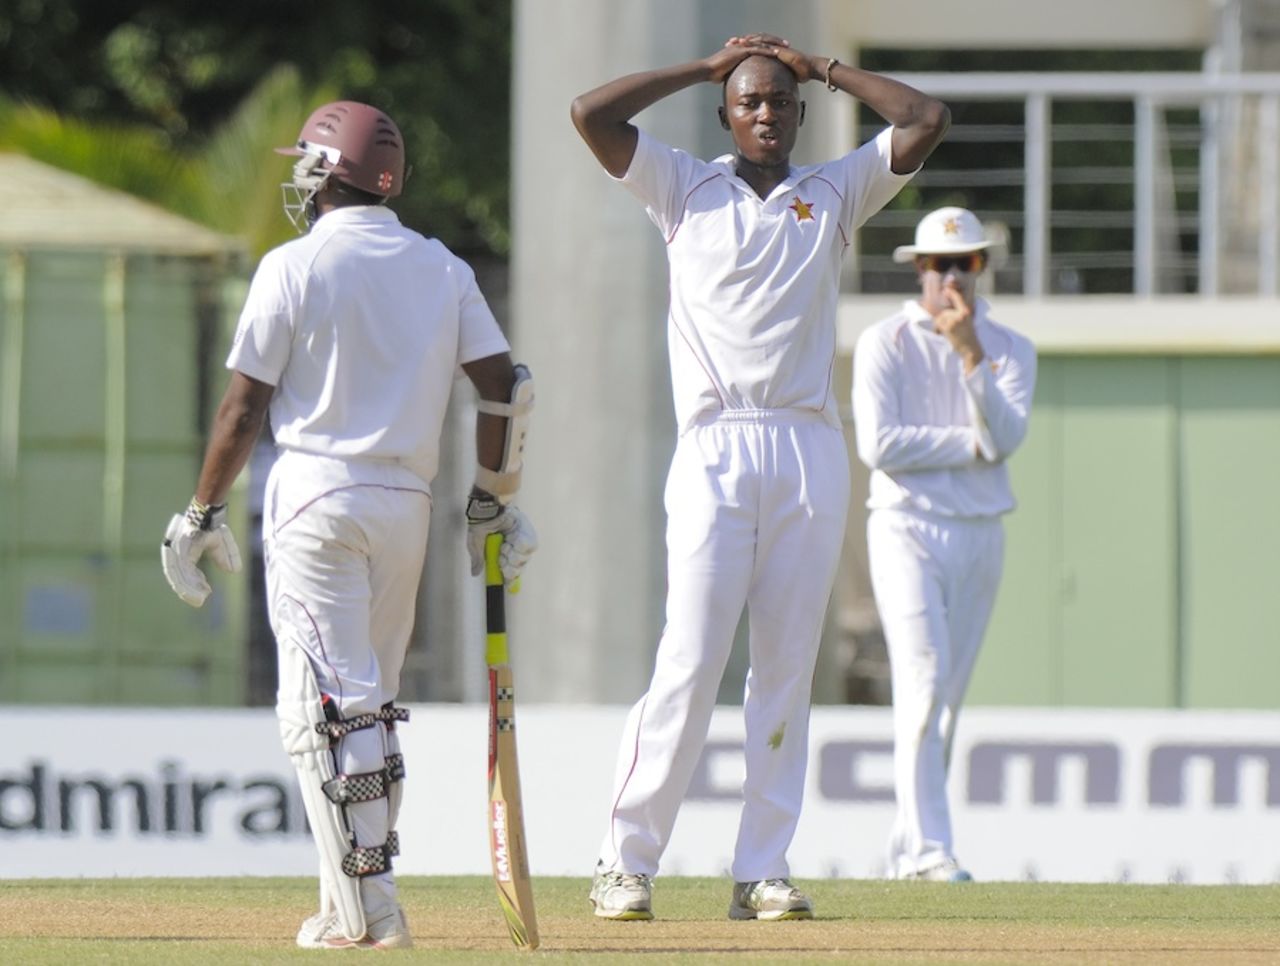 Tendai Chatara has his hands on his head, West Indies v Zimbabwe, 2nd Test, Roseau, 2nd day, March 21, 2013